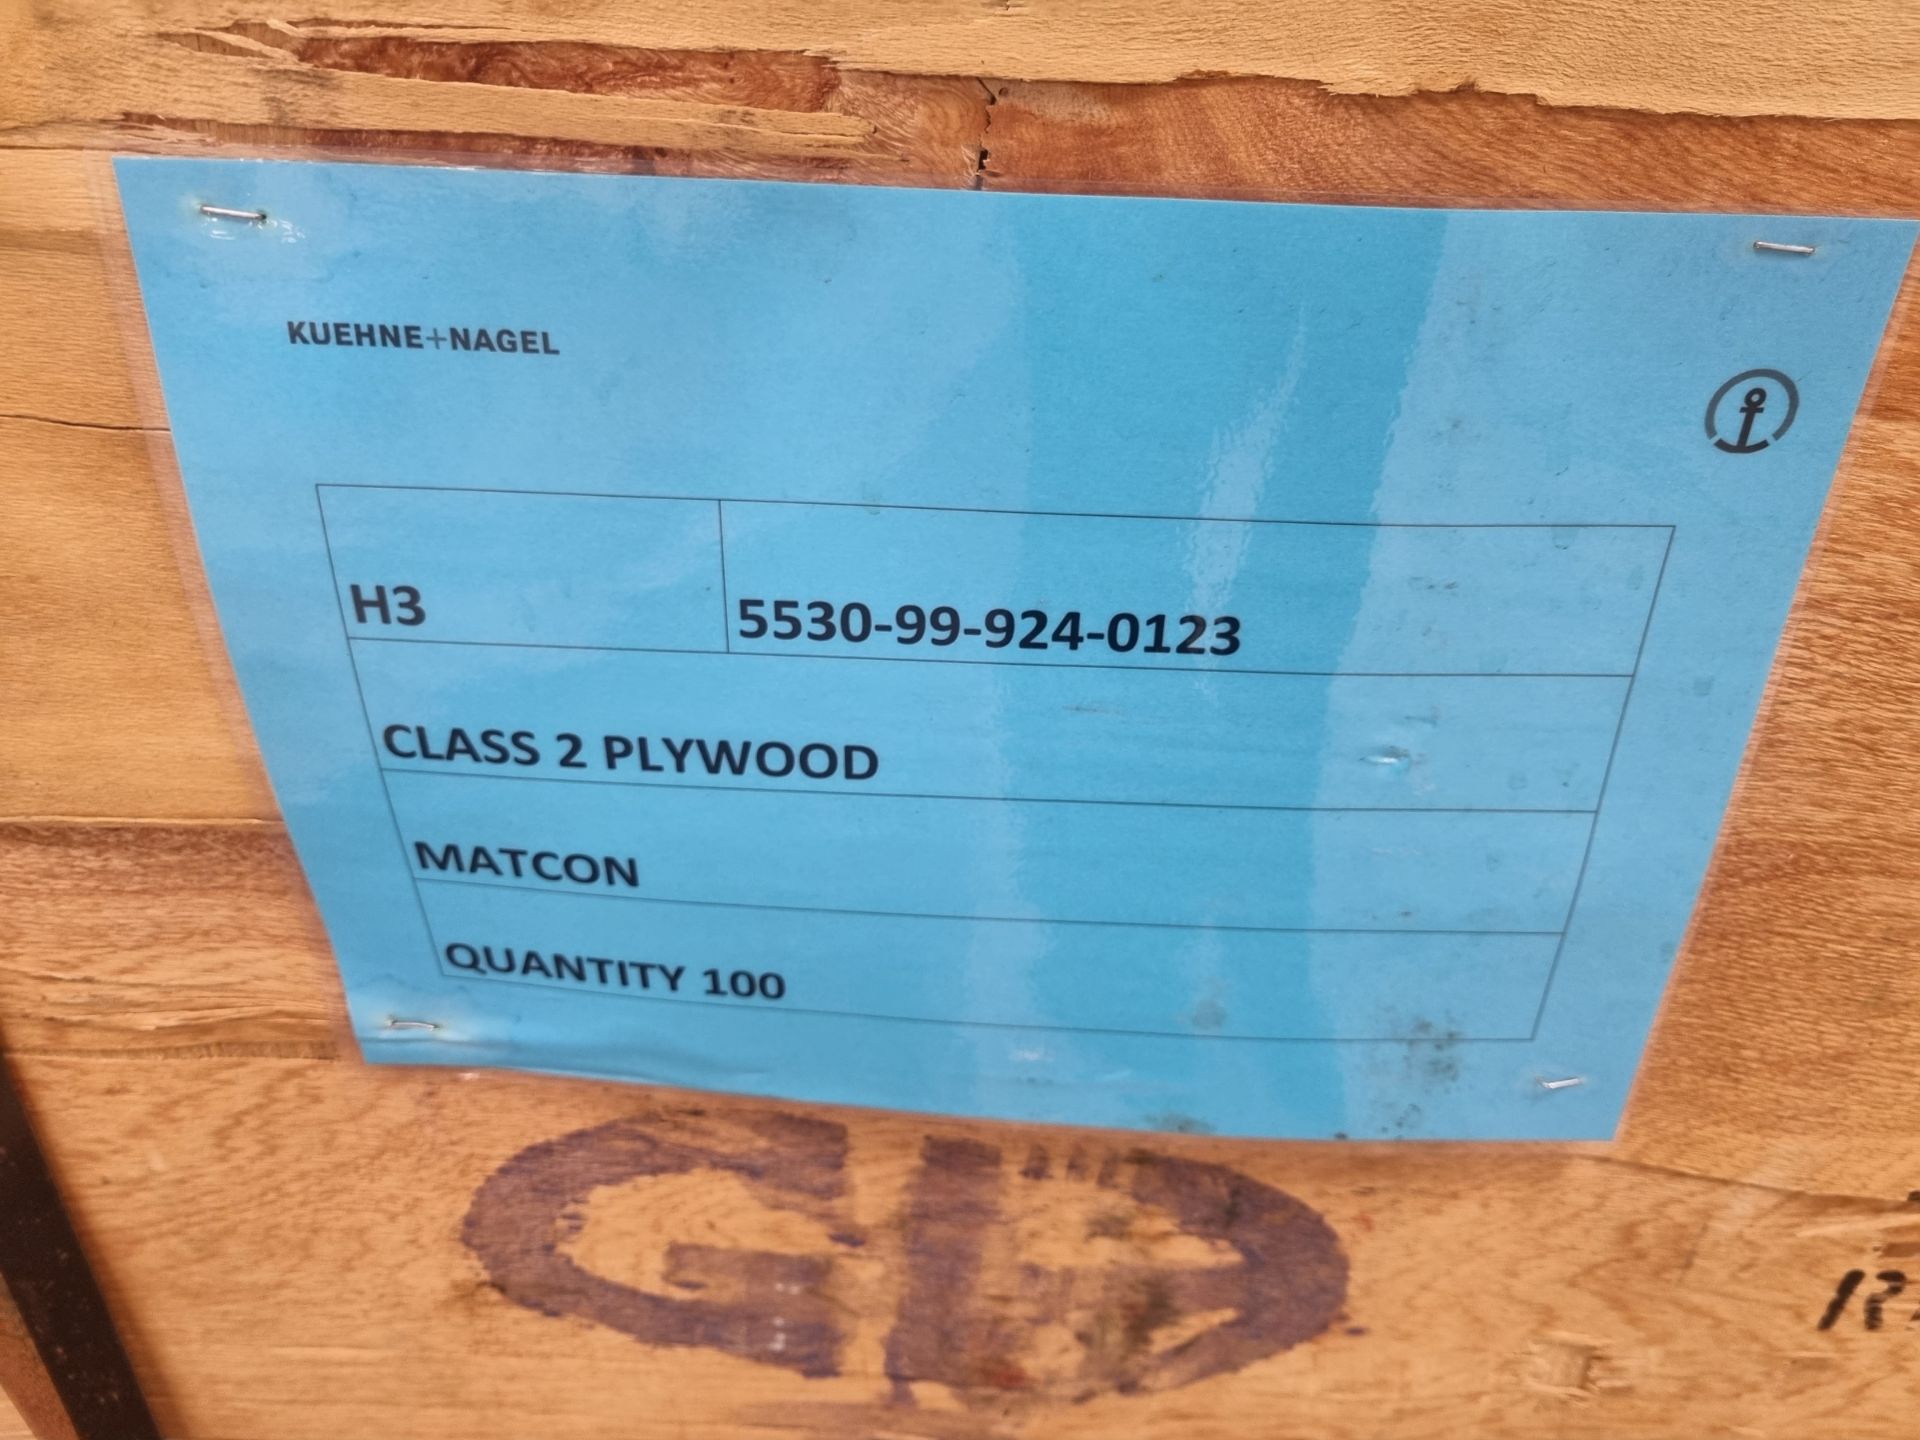 Pallet of 9mm Class 2 plywood - 8x4ft (244x122cm) - 100 sheets - Image 2 of 3